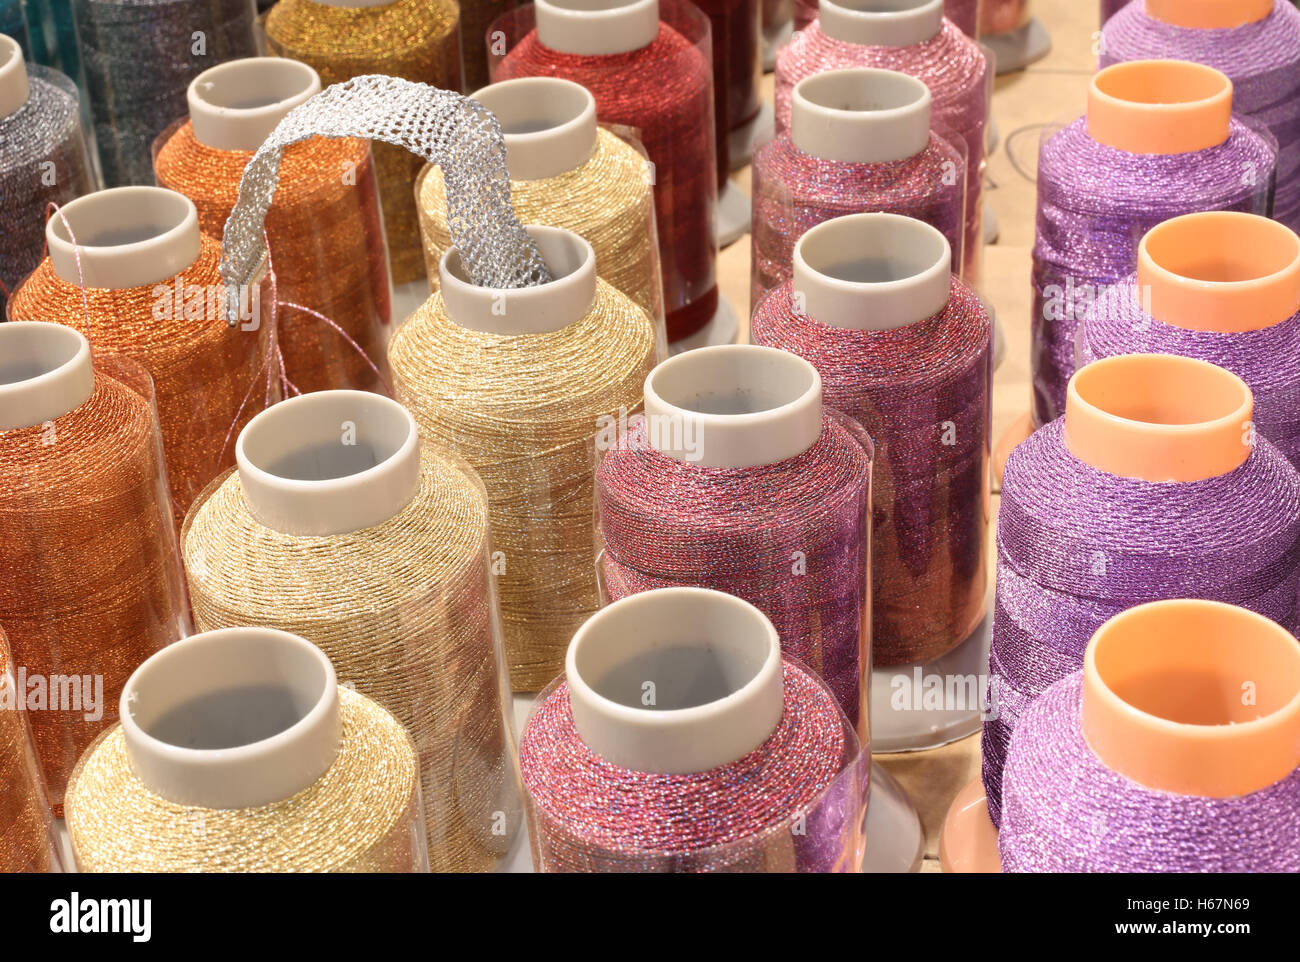 many colorful spools of thread with rhinestones on sale in English haberdashery Stock Photo